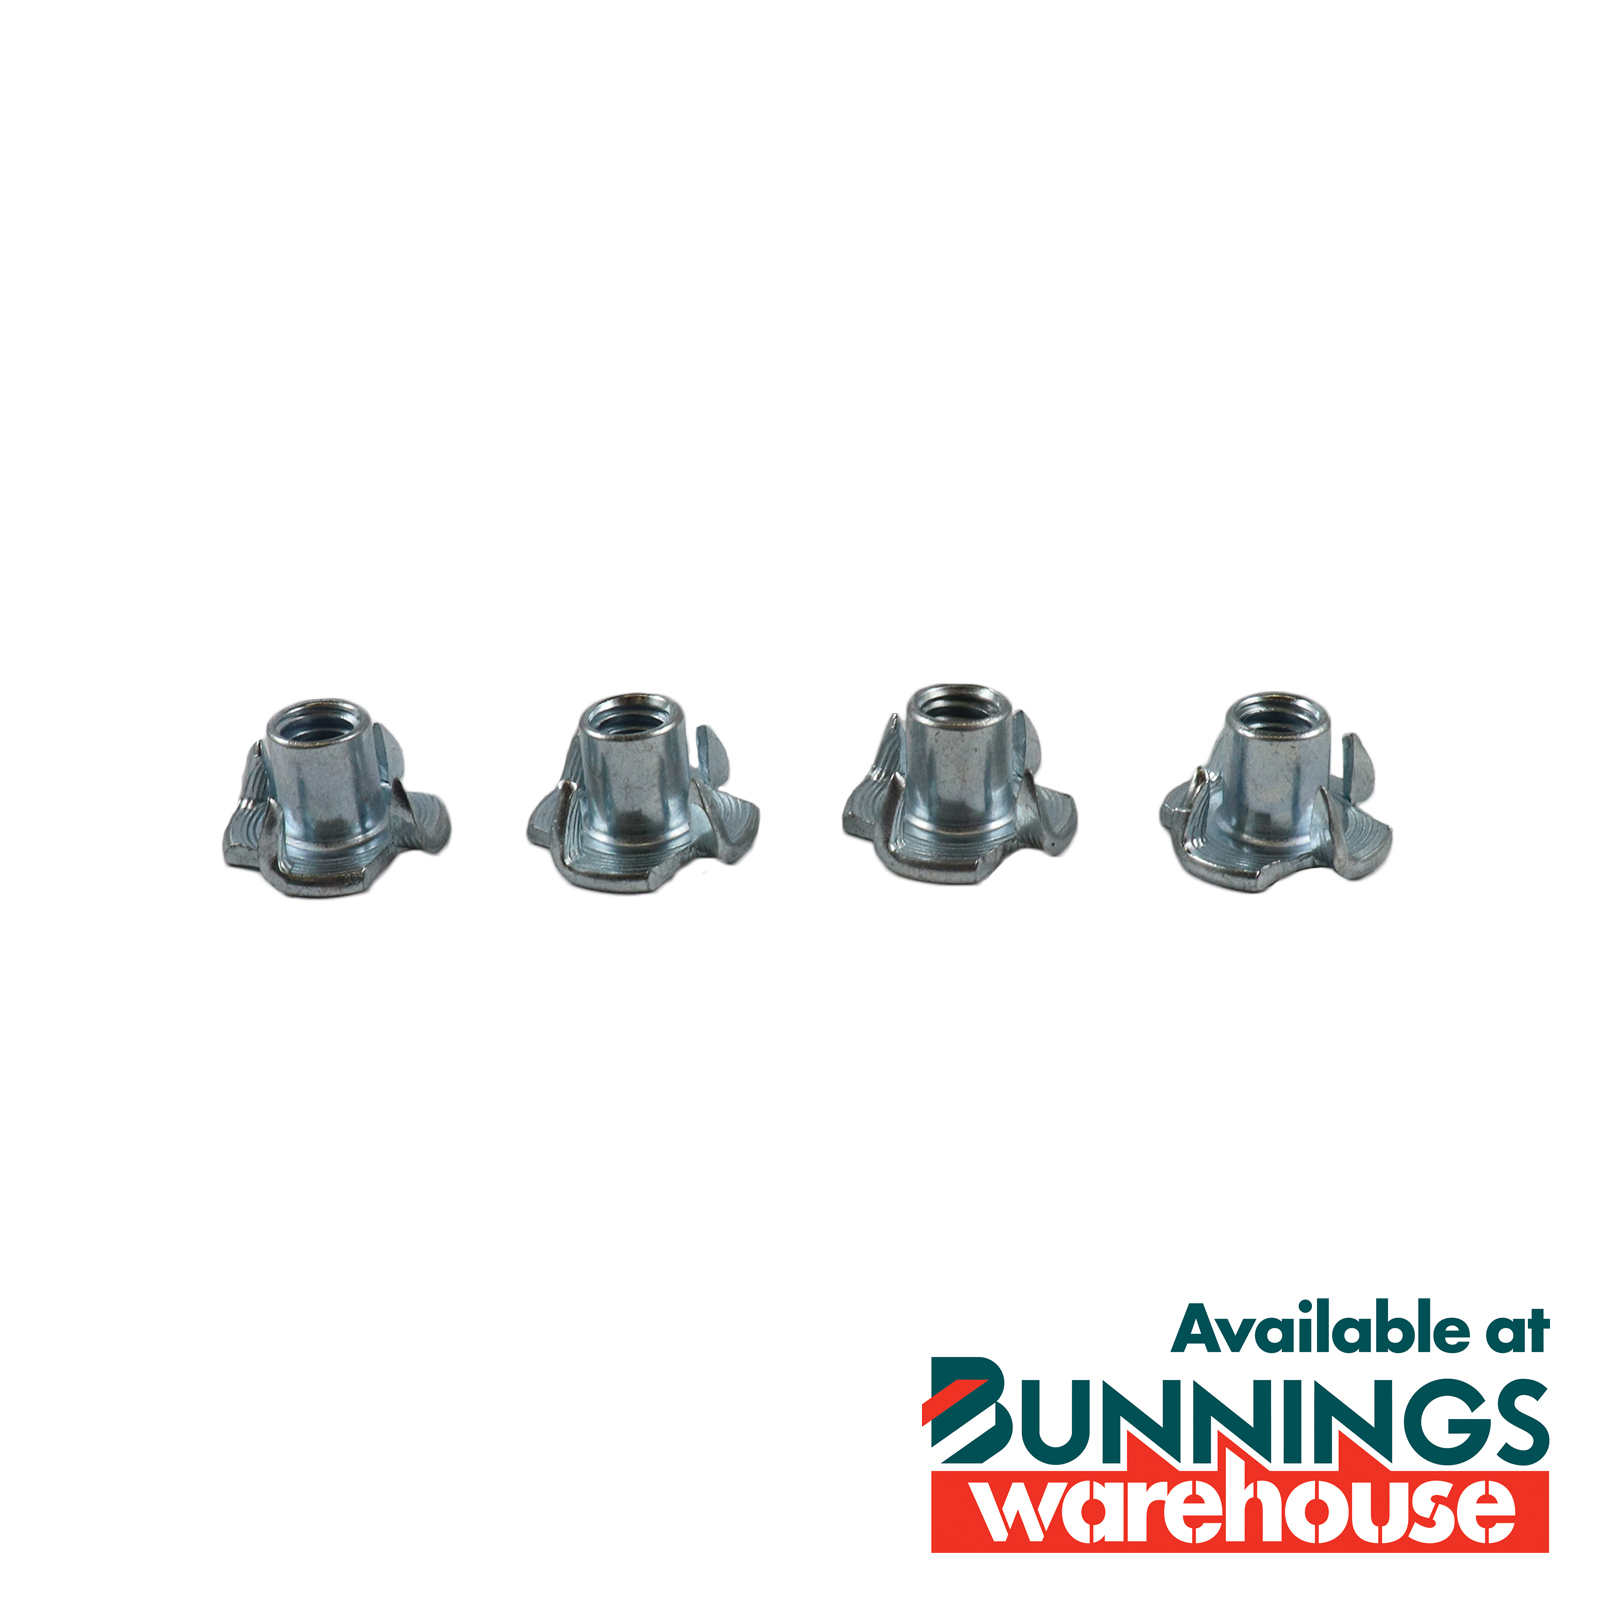 Adoored 1/4" T-Nuts 4PK